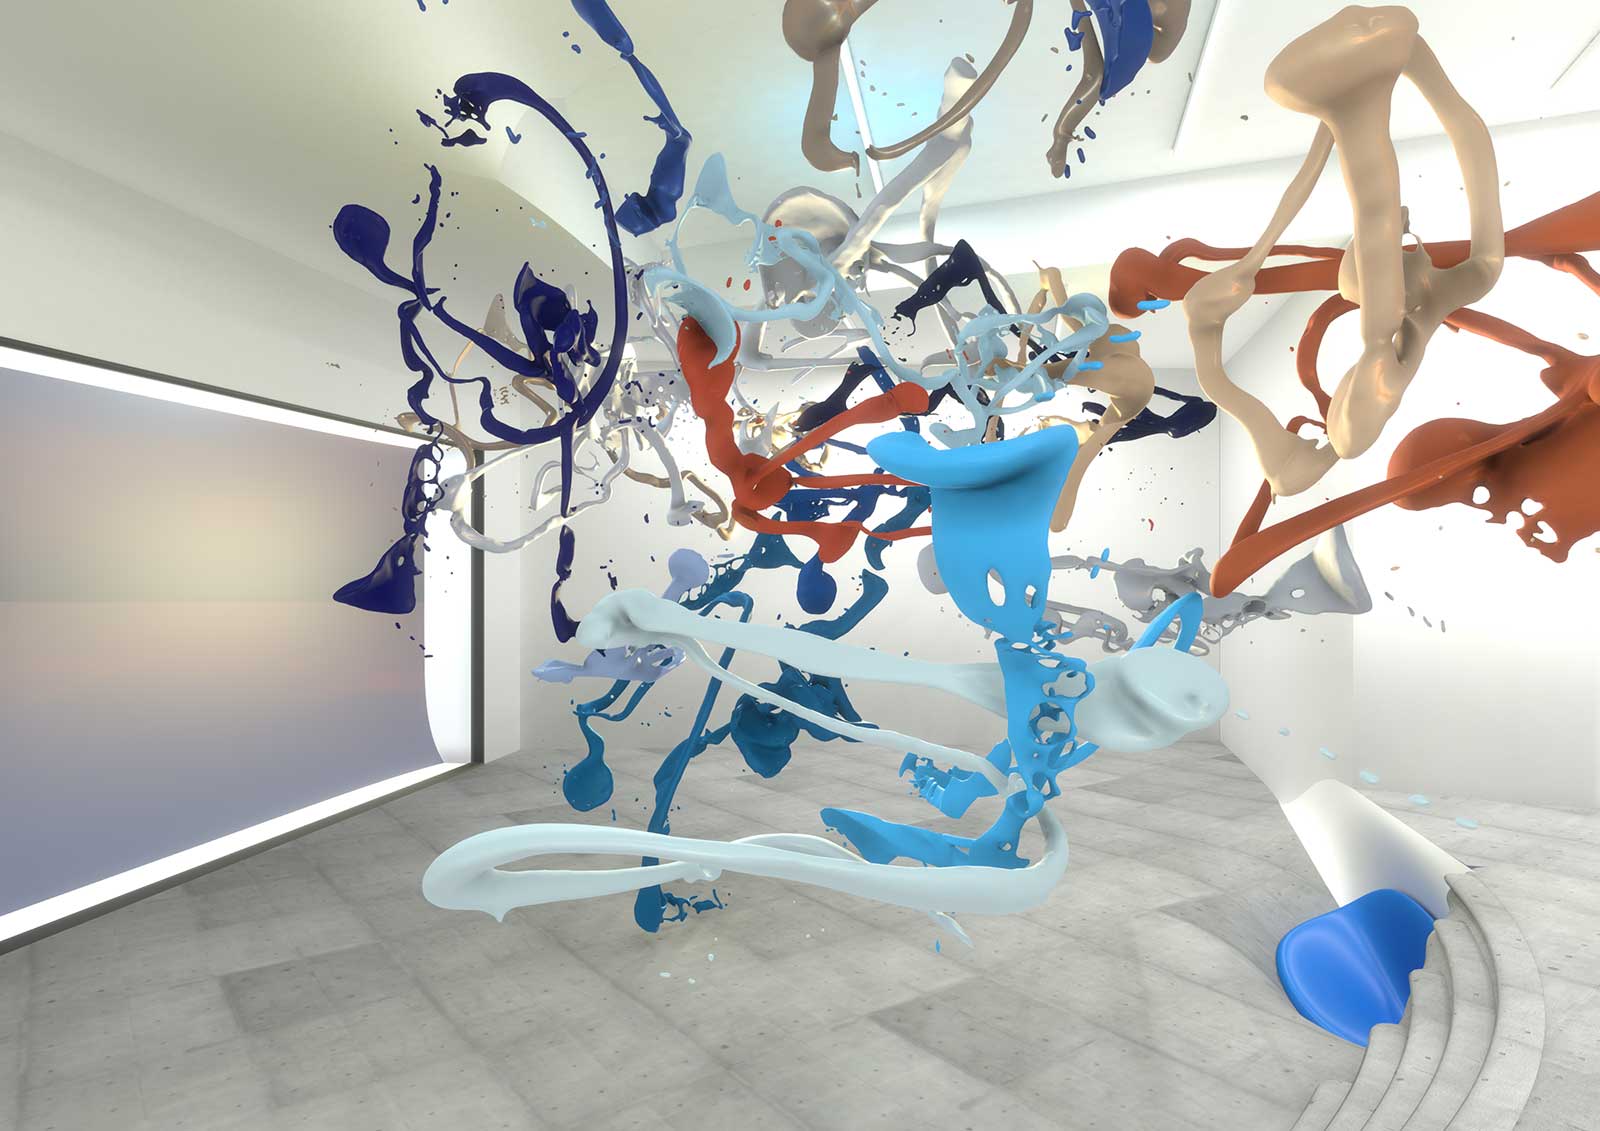 VR Bodypaint 01, Cube, Roehrs & Boetsch Gallery, Exhibition View, 2019